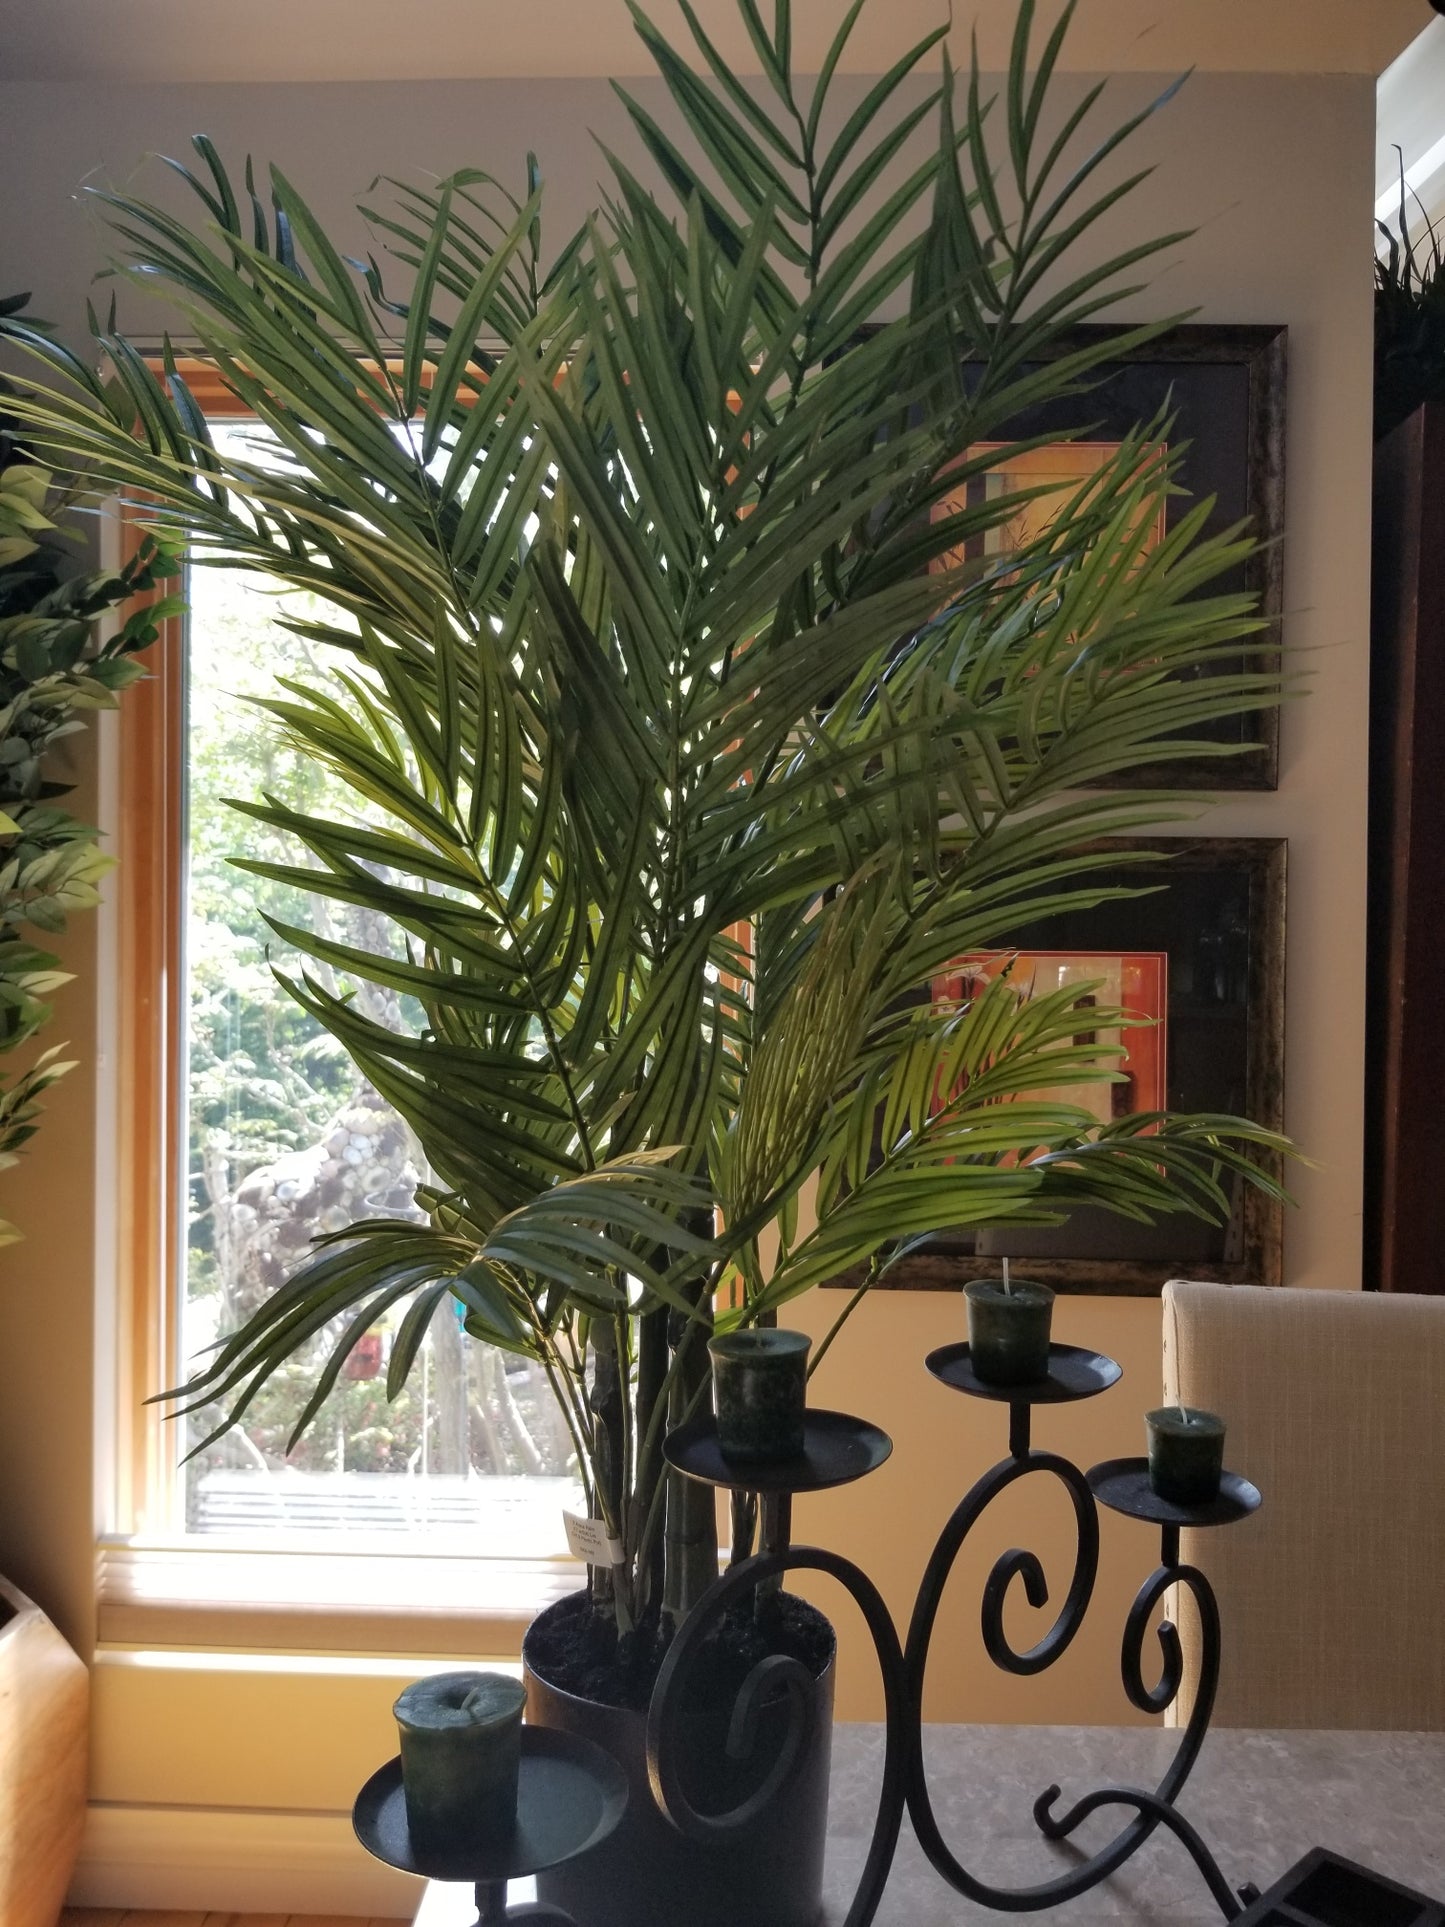 3 foot areca palm tree for sale